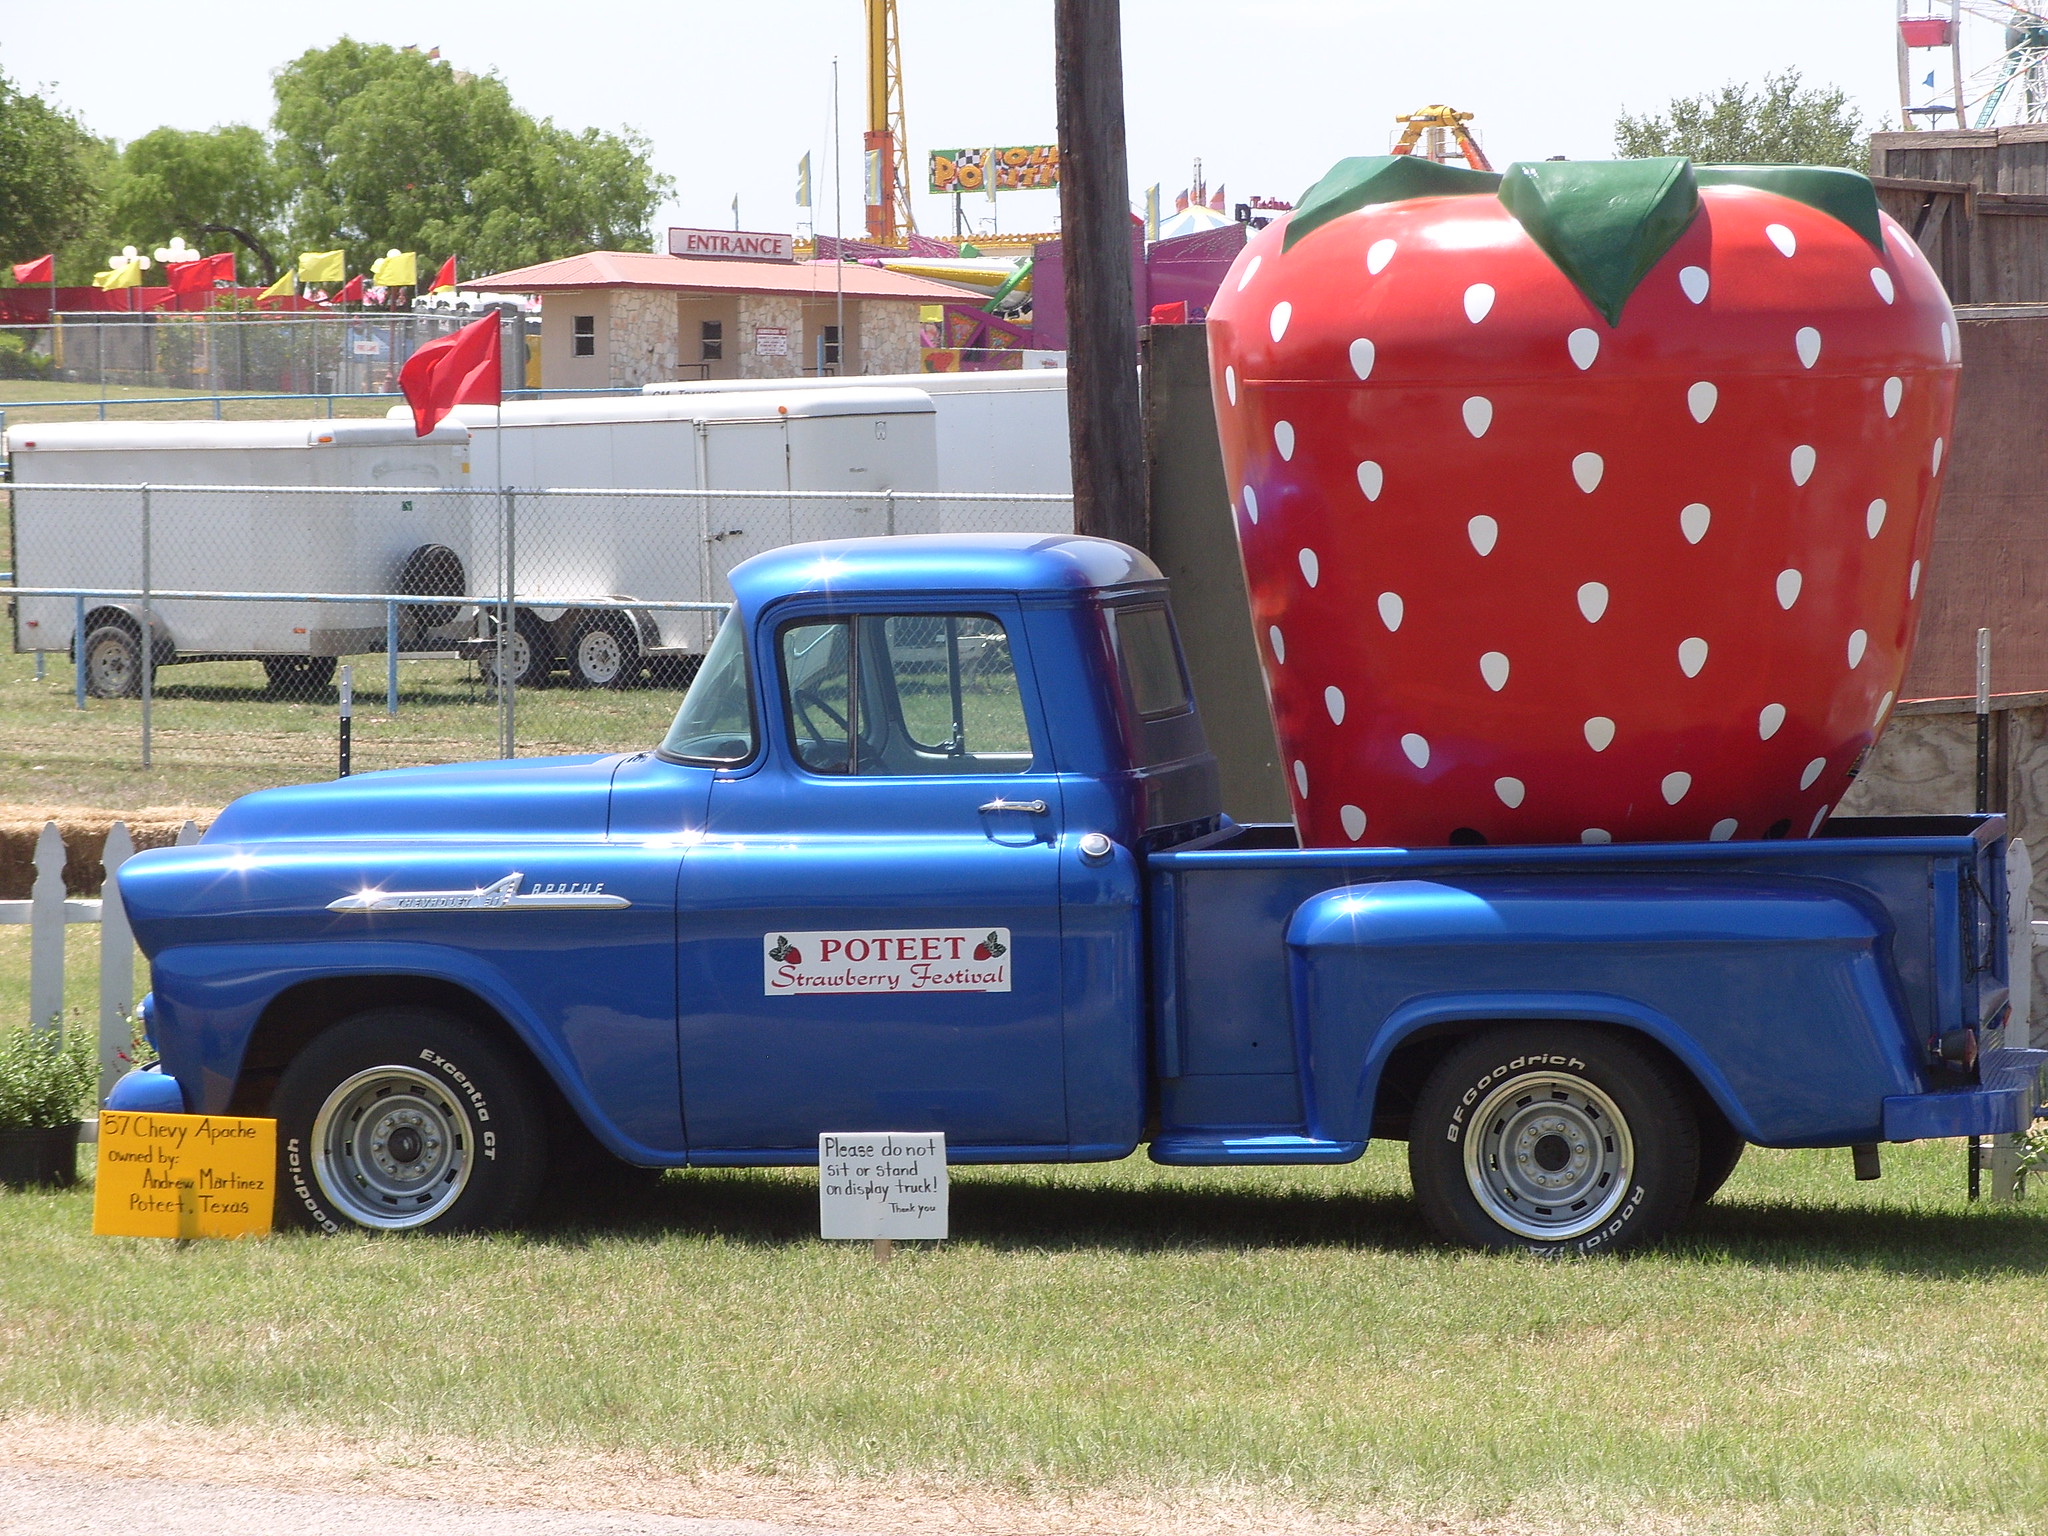 Poteet Strawberry Festival | Live Stream, Lineup, and Tickets Info